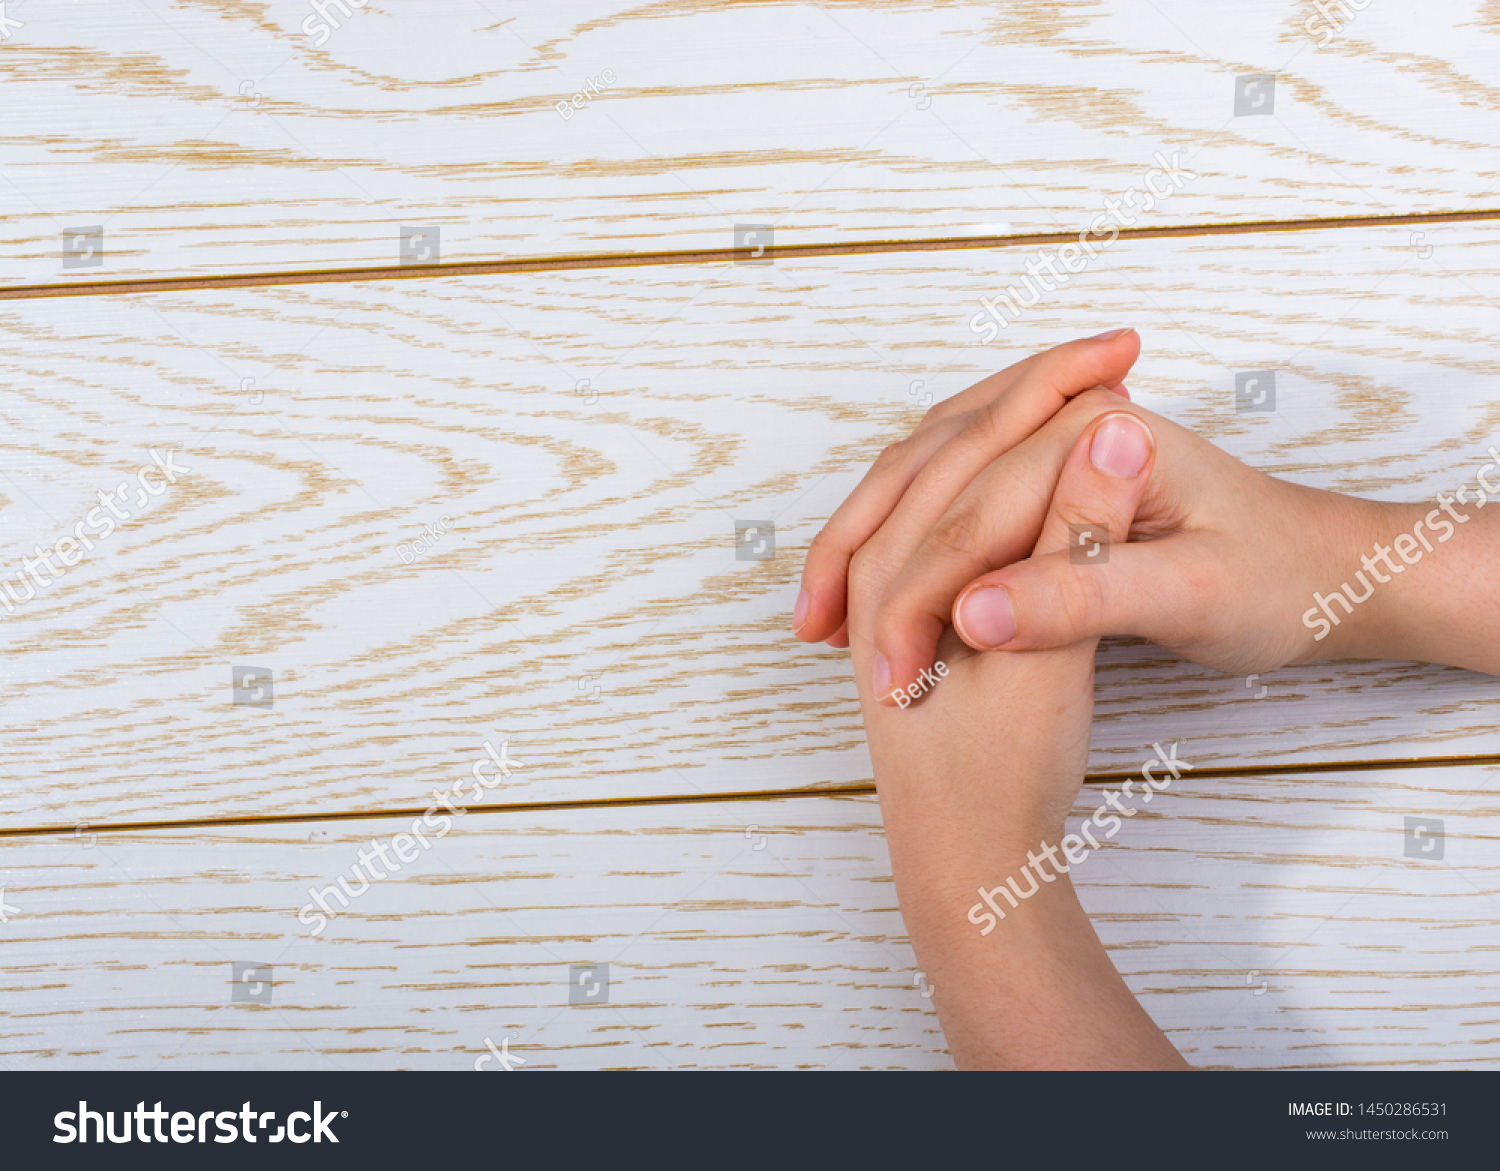 Hands making a gesture on a wooden background #1450286531